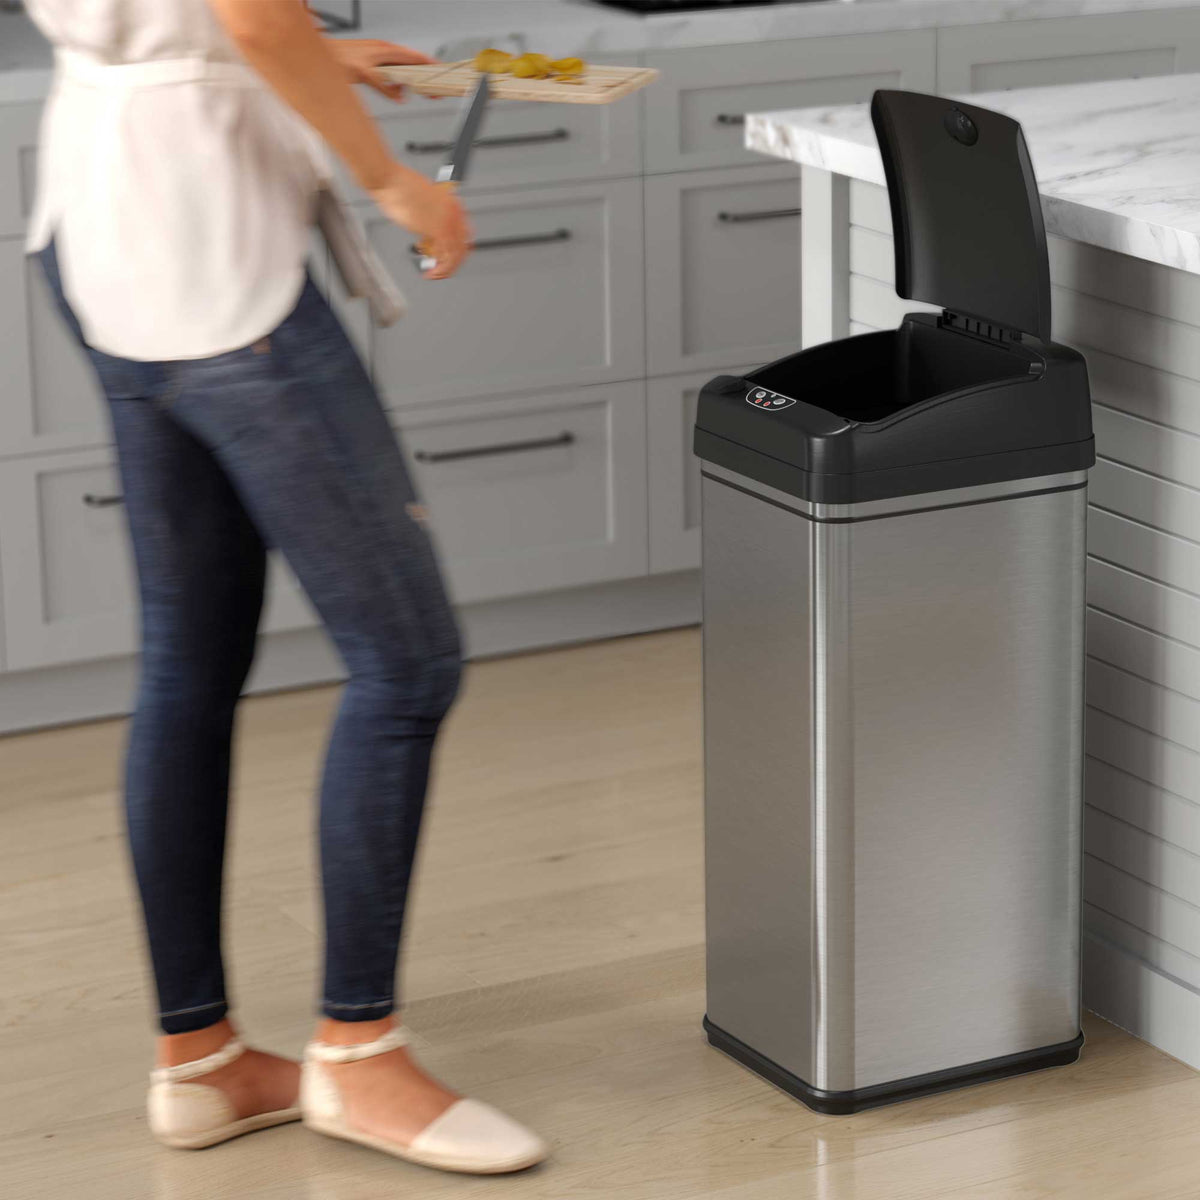 13 Gallon Sensor Trash Can with AC Power Adapter in kitchen